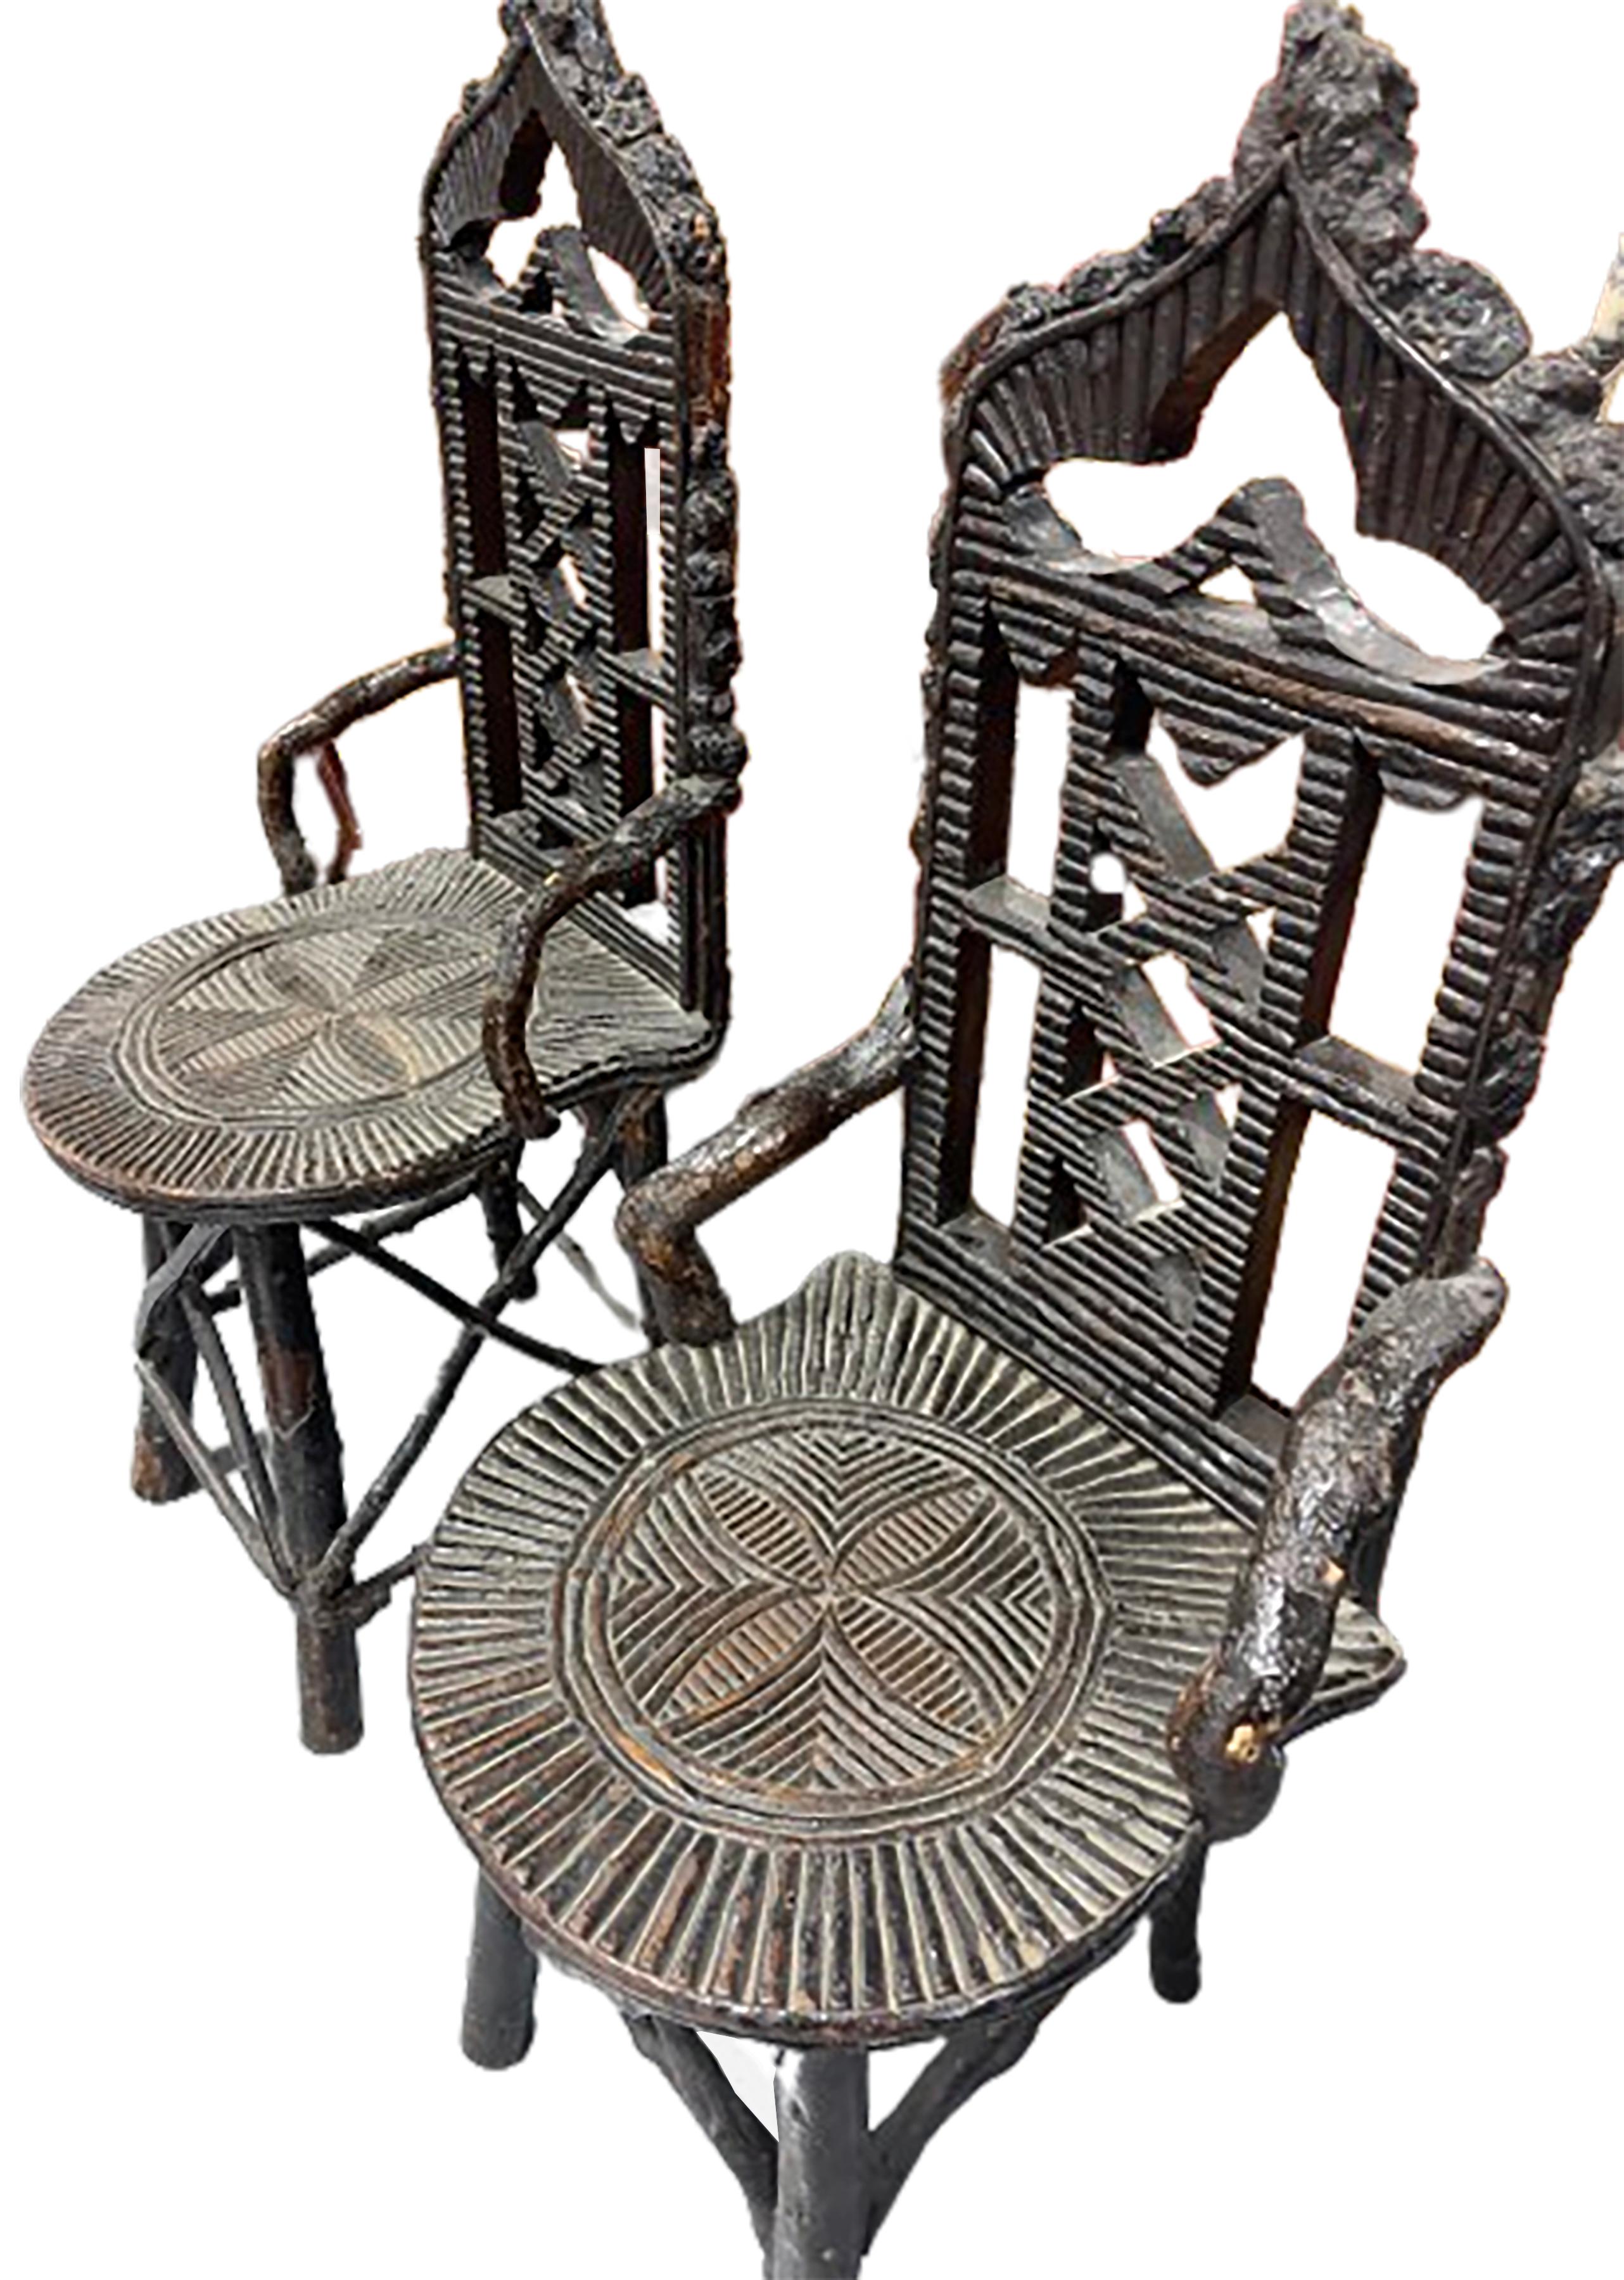 A handsome pair of primitive antique black forest chairs.  Intricately carved patterns on the seat as well as a ventilated back rest. Walnut. 
 
In good condition. Gentle wear consistent with age and use.  

This pair of chairs would make a great